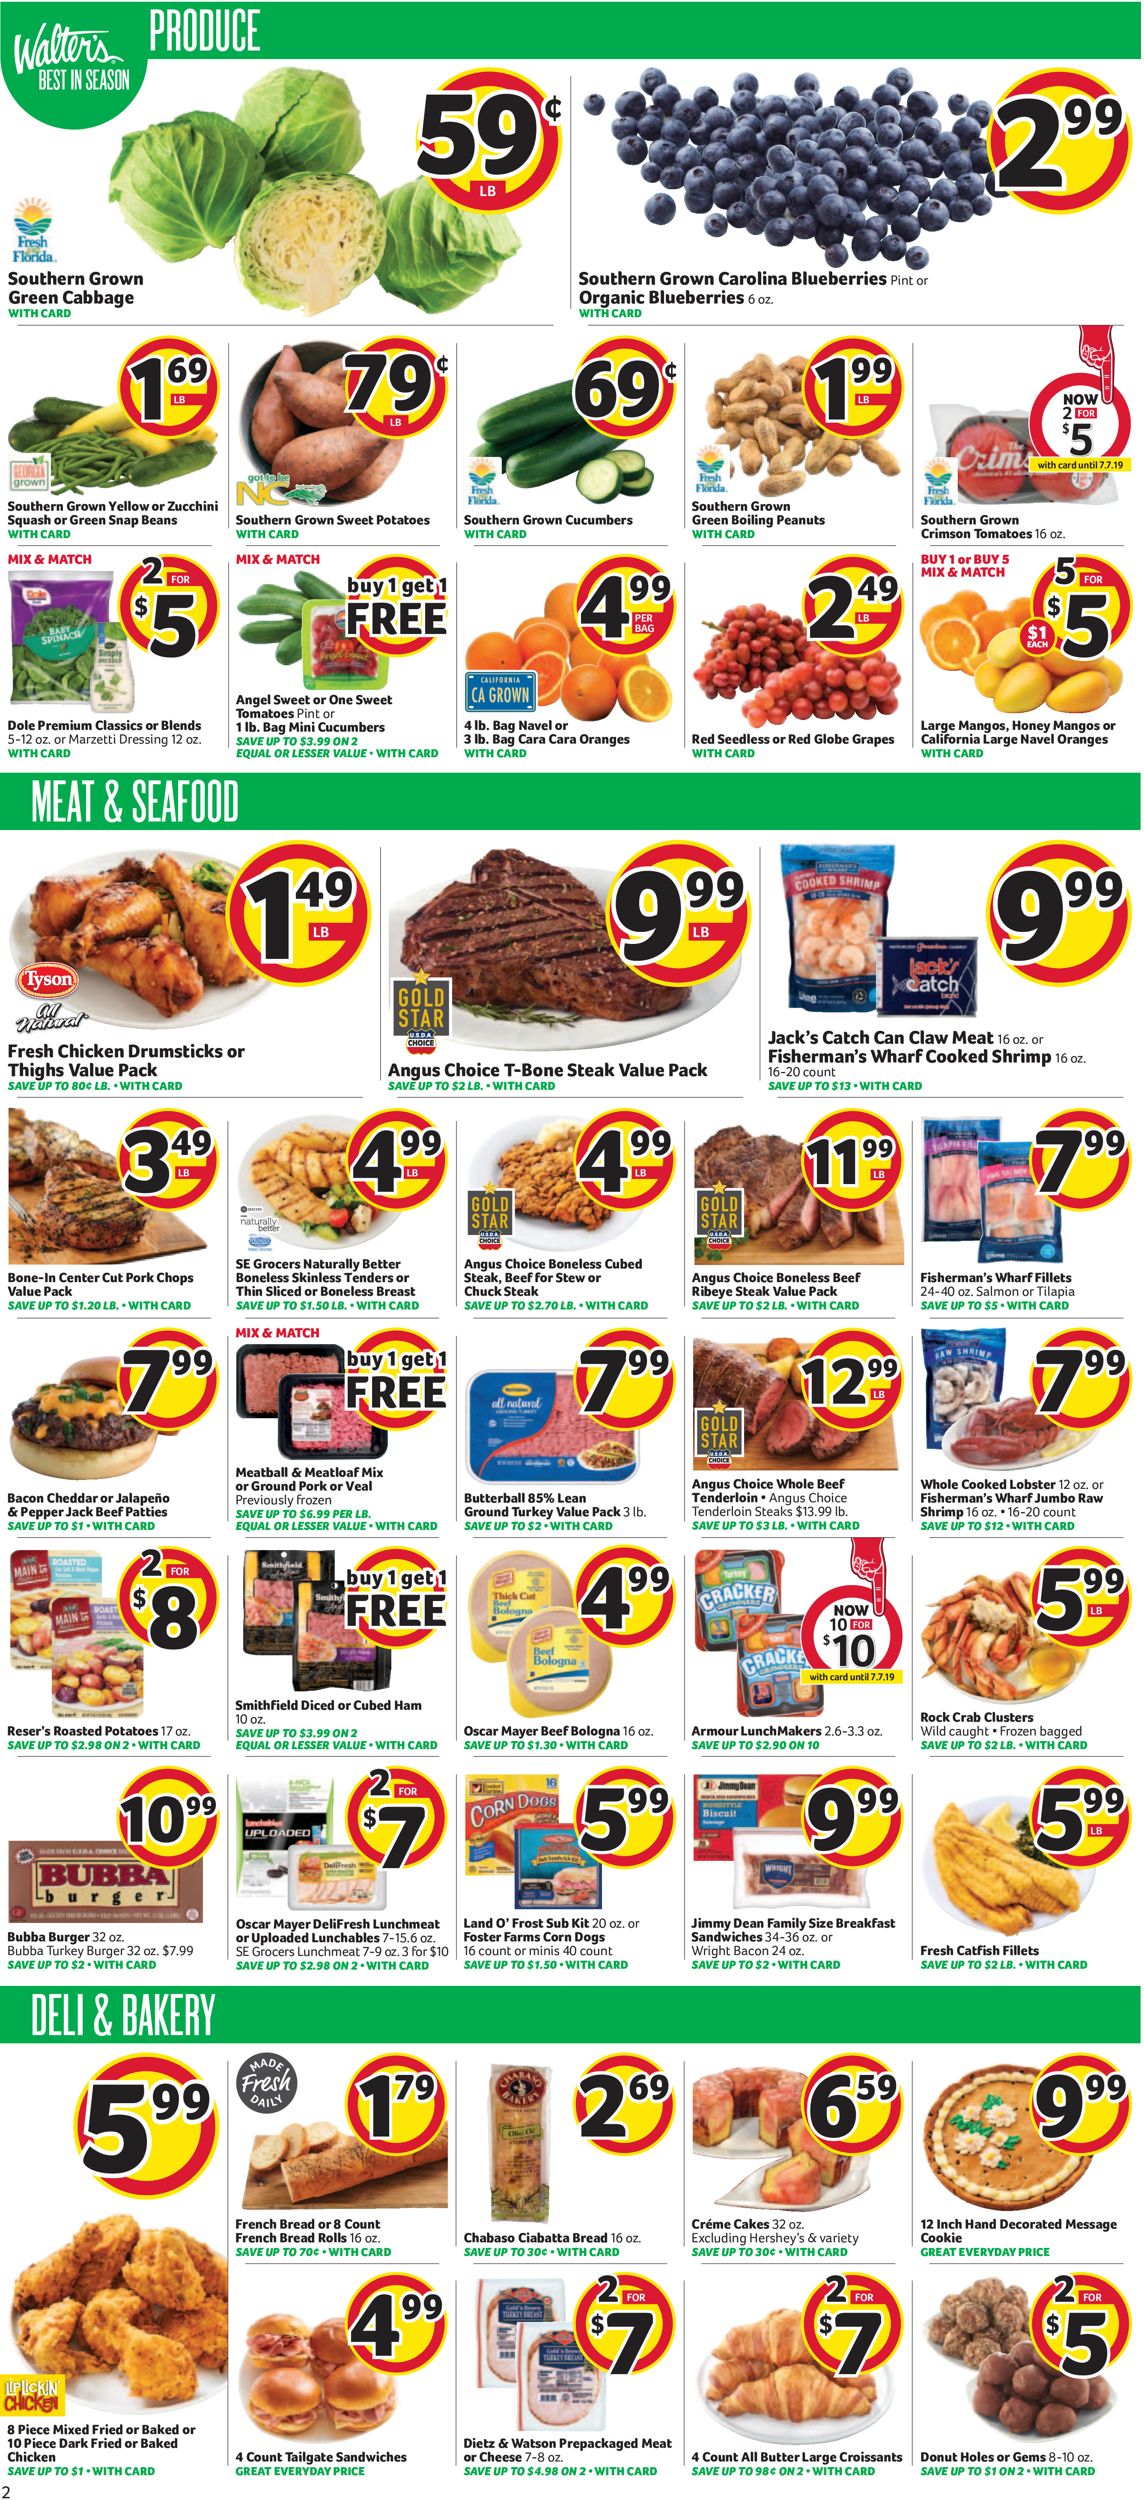 BI-LO Current weekly ad 05/15 - 05/21/2019 2 - frequent ...